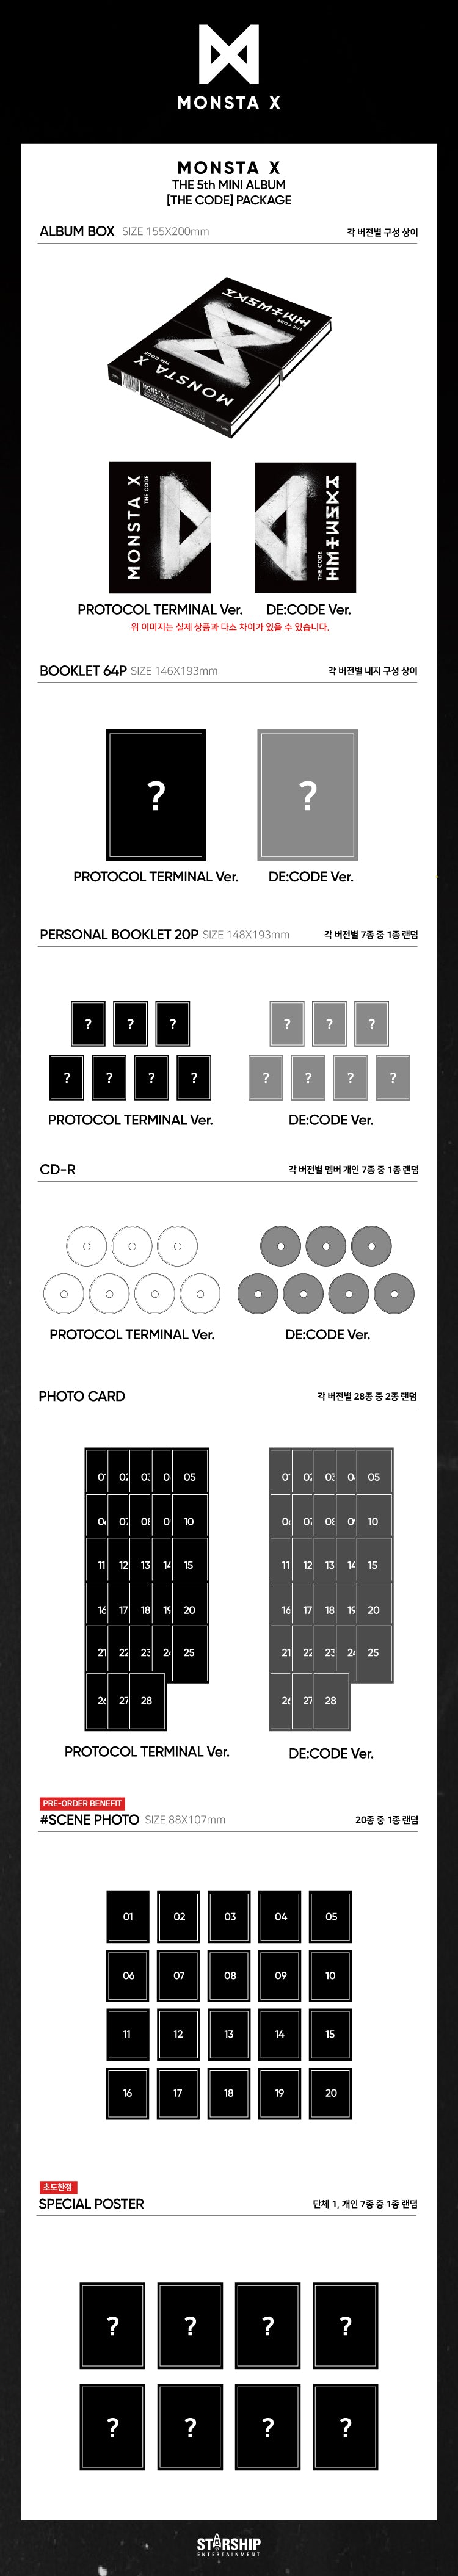 1 CD
1 Booklet (64 pages)
1 Personal Booklet (20 pages)
2 Photo Cards (random out of 28 types per version)